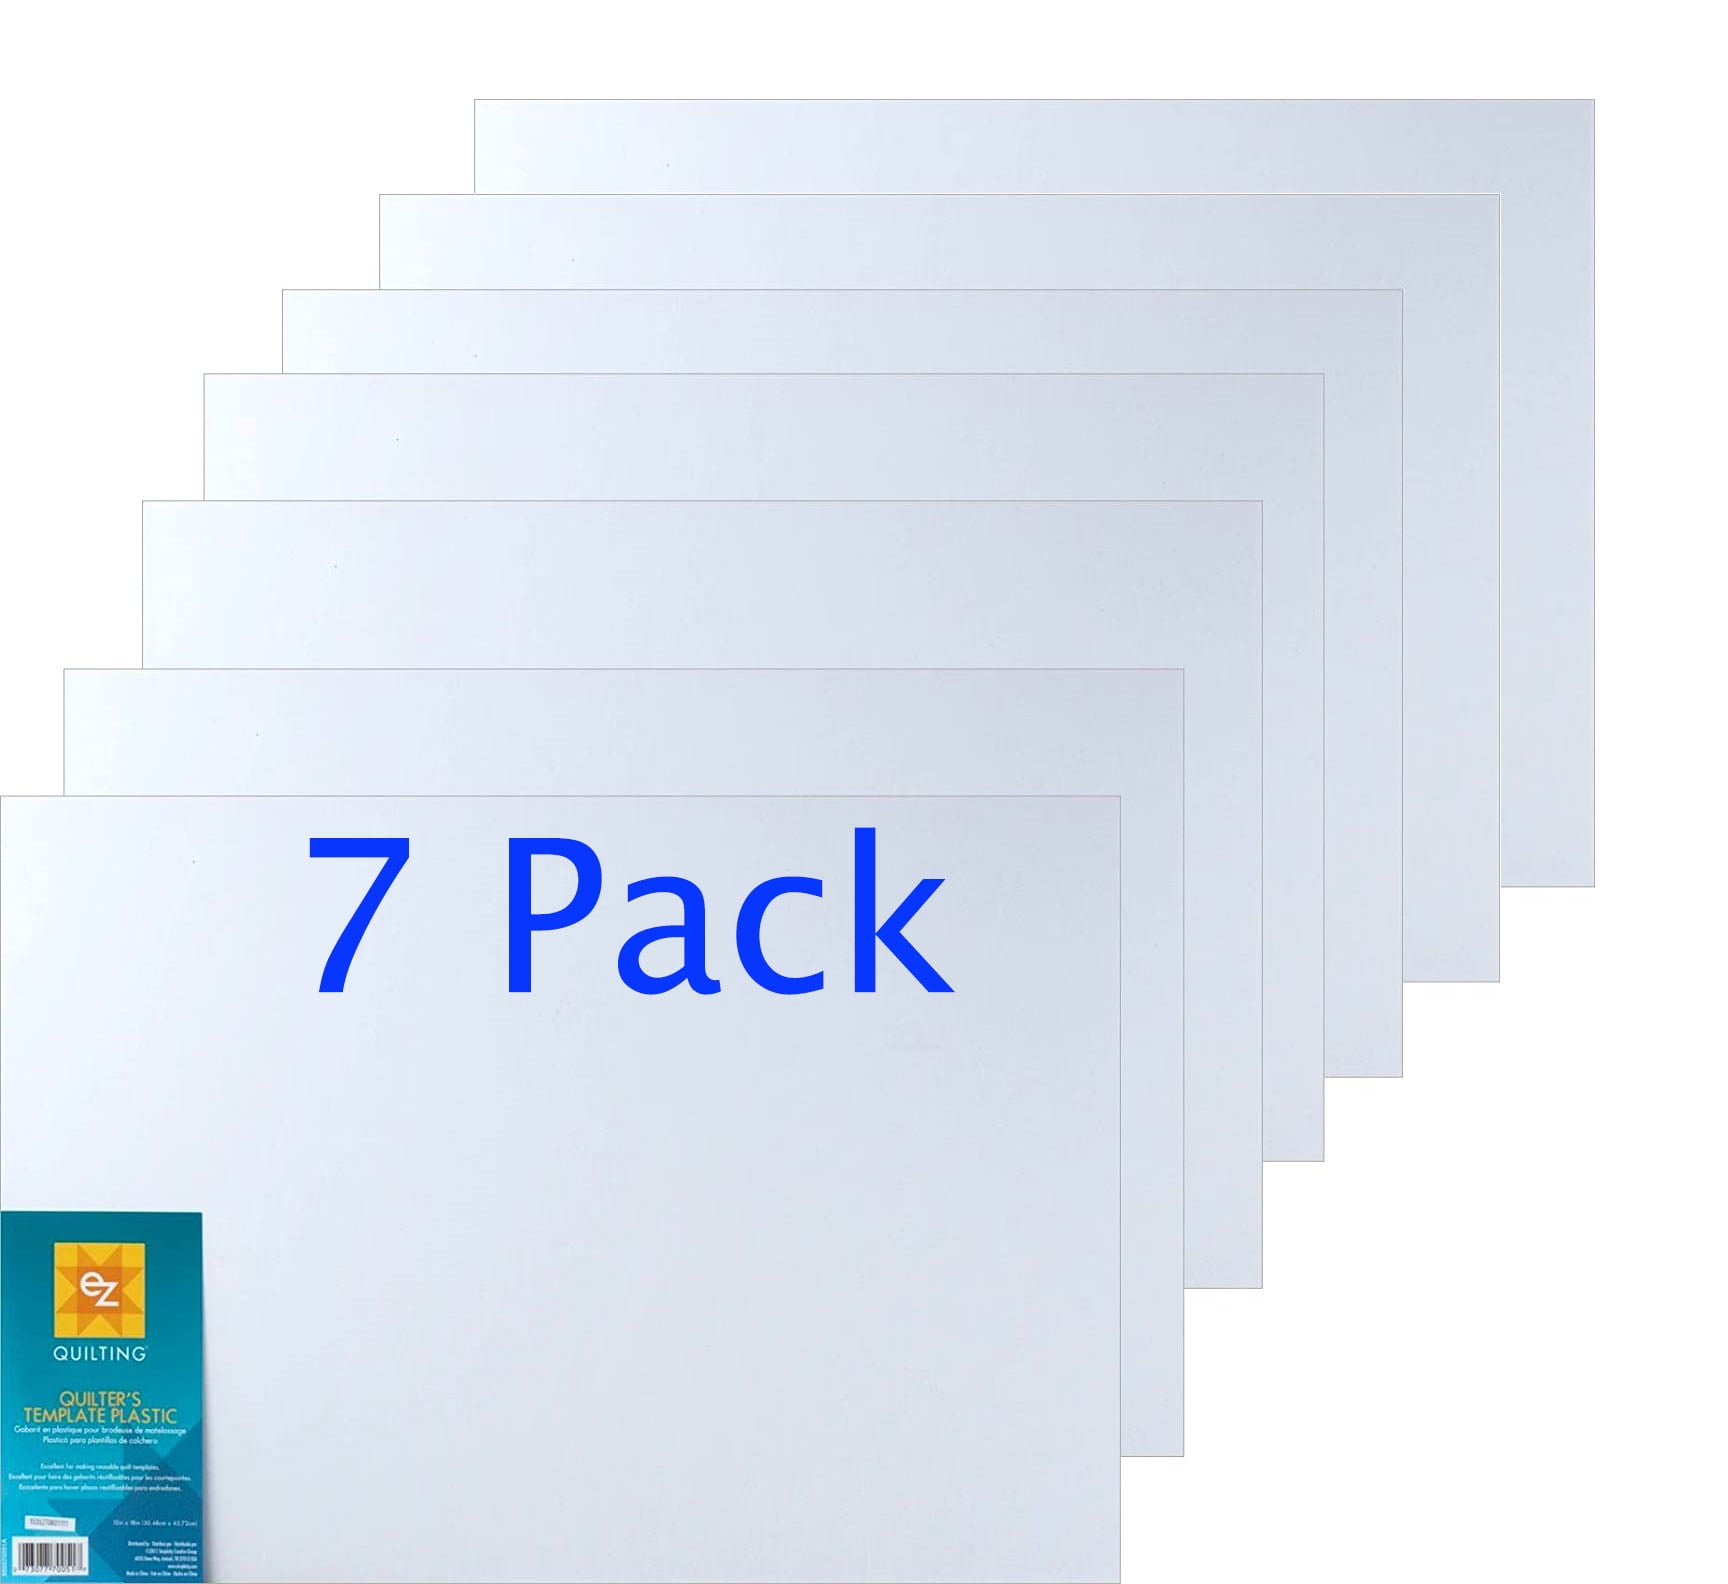 Flagship Stores Bundle Of EZ International Quilting By Wrights Blank Plastic Template Sheets 3